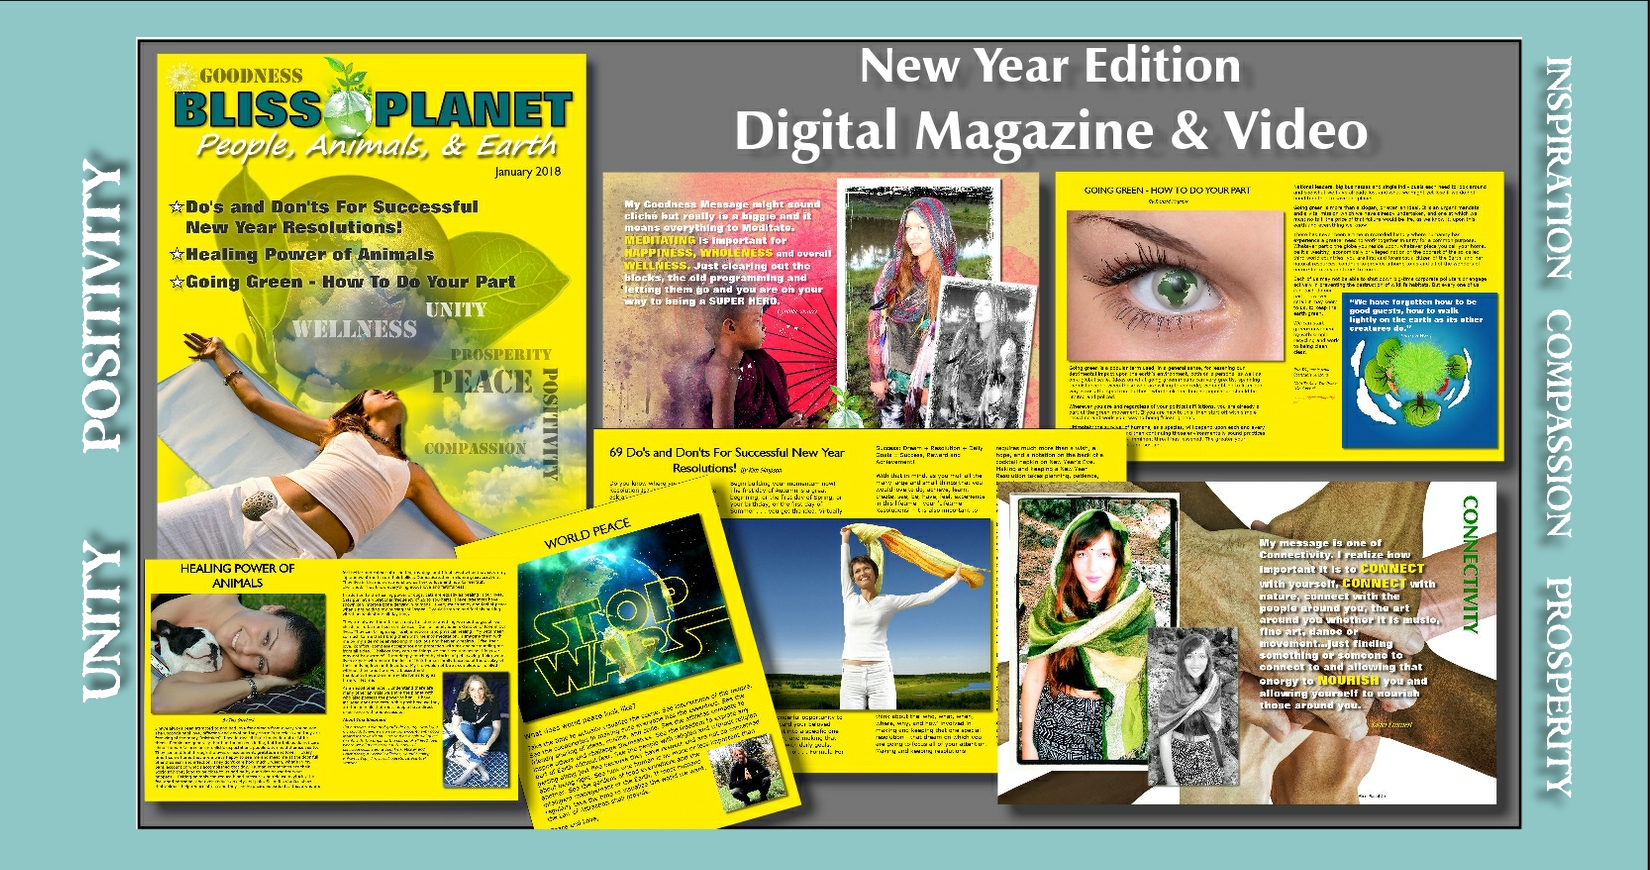 January 2018 New Year Edition